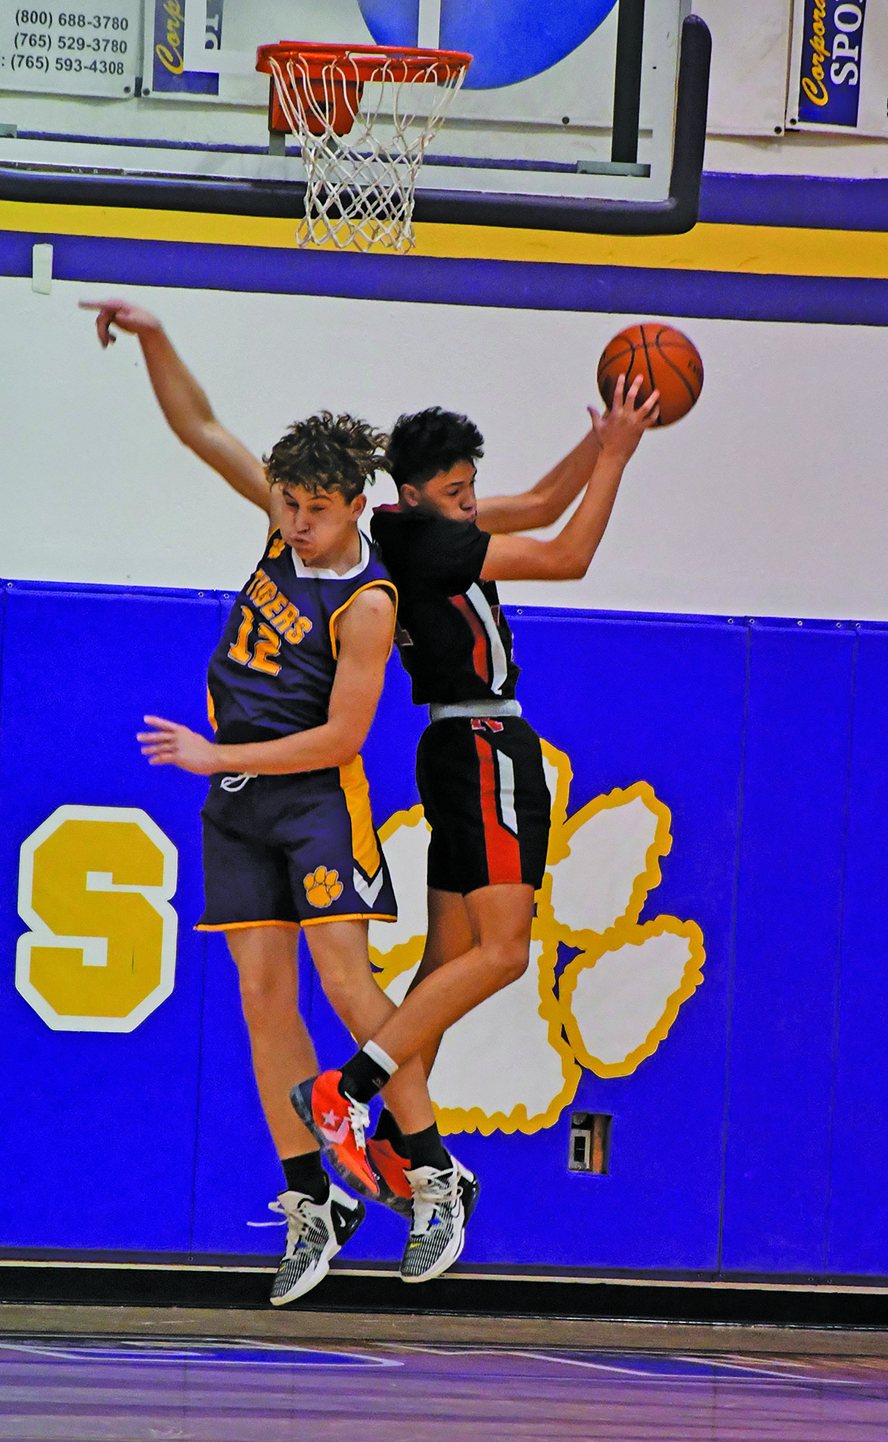 Two high school basketball players competing for the ball